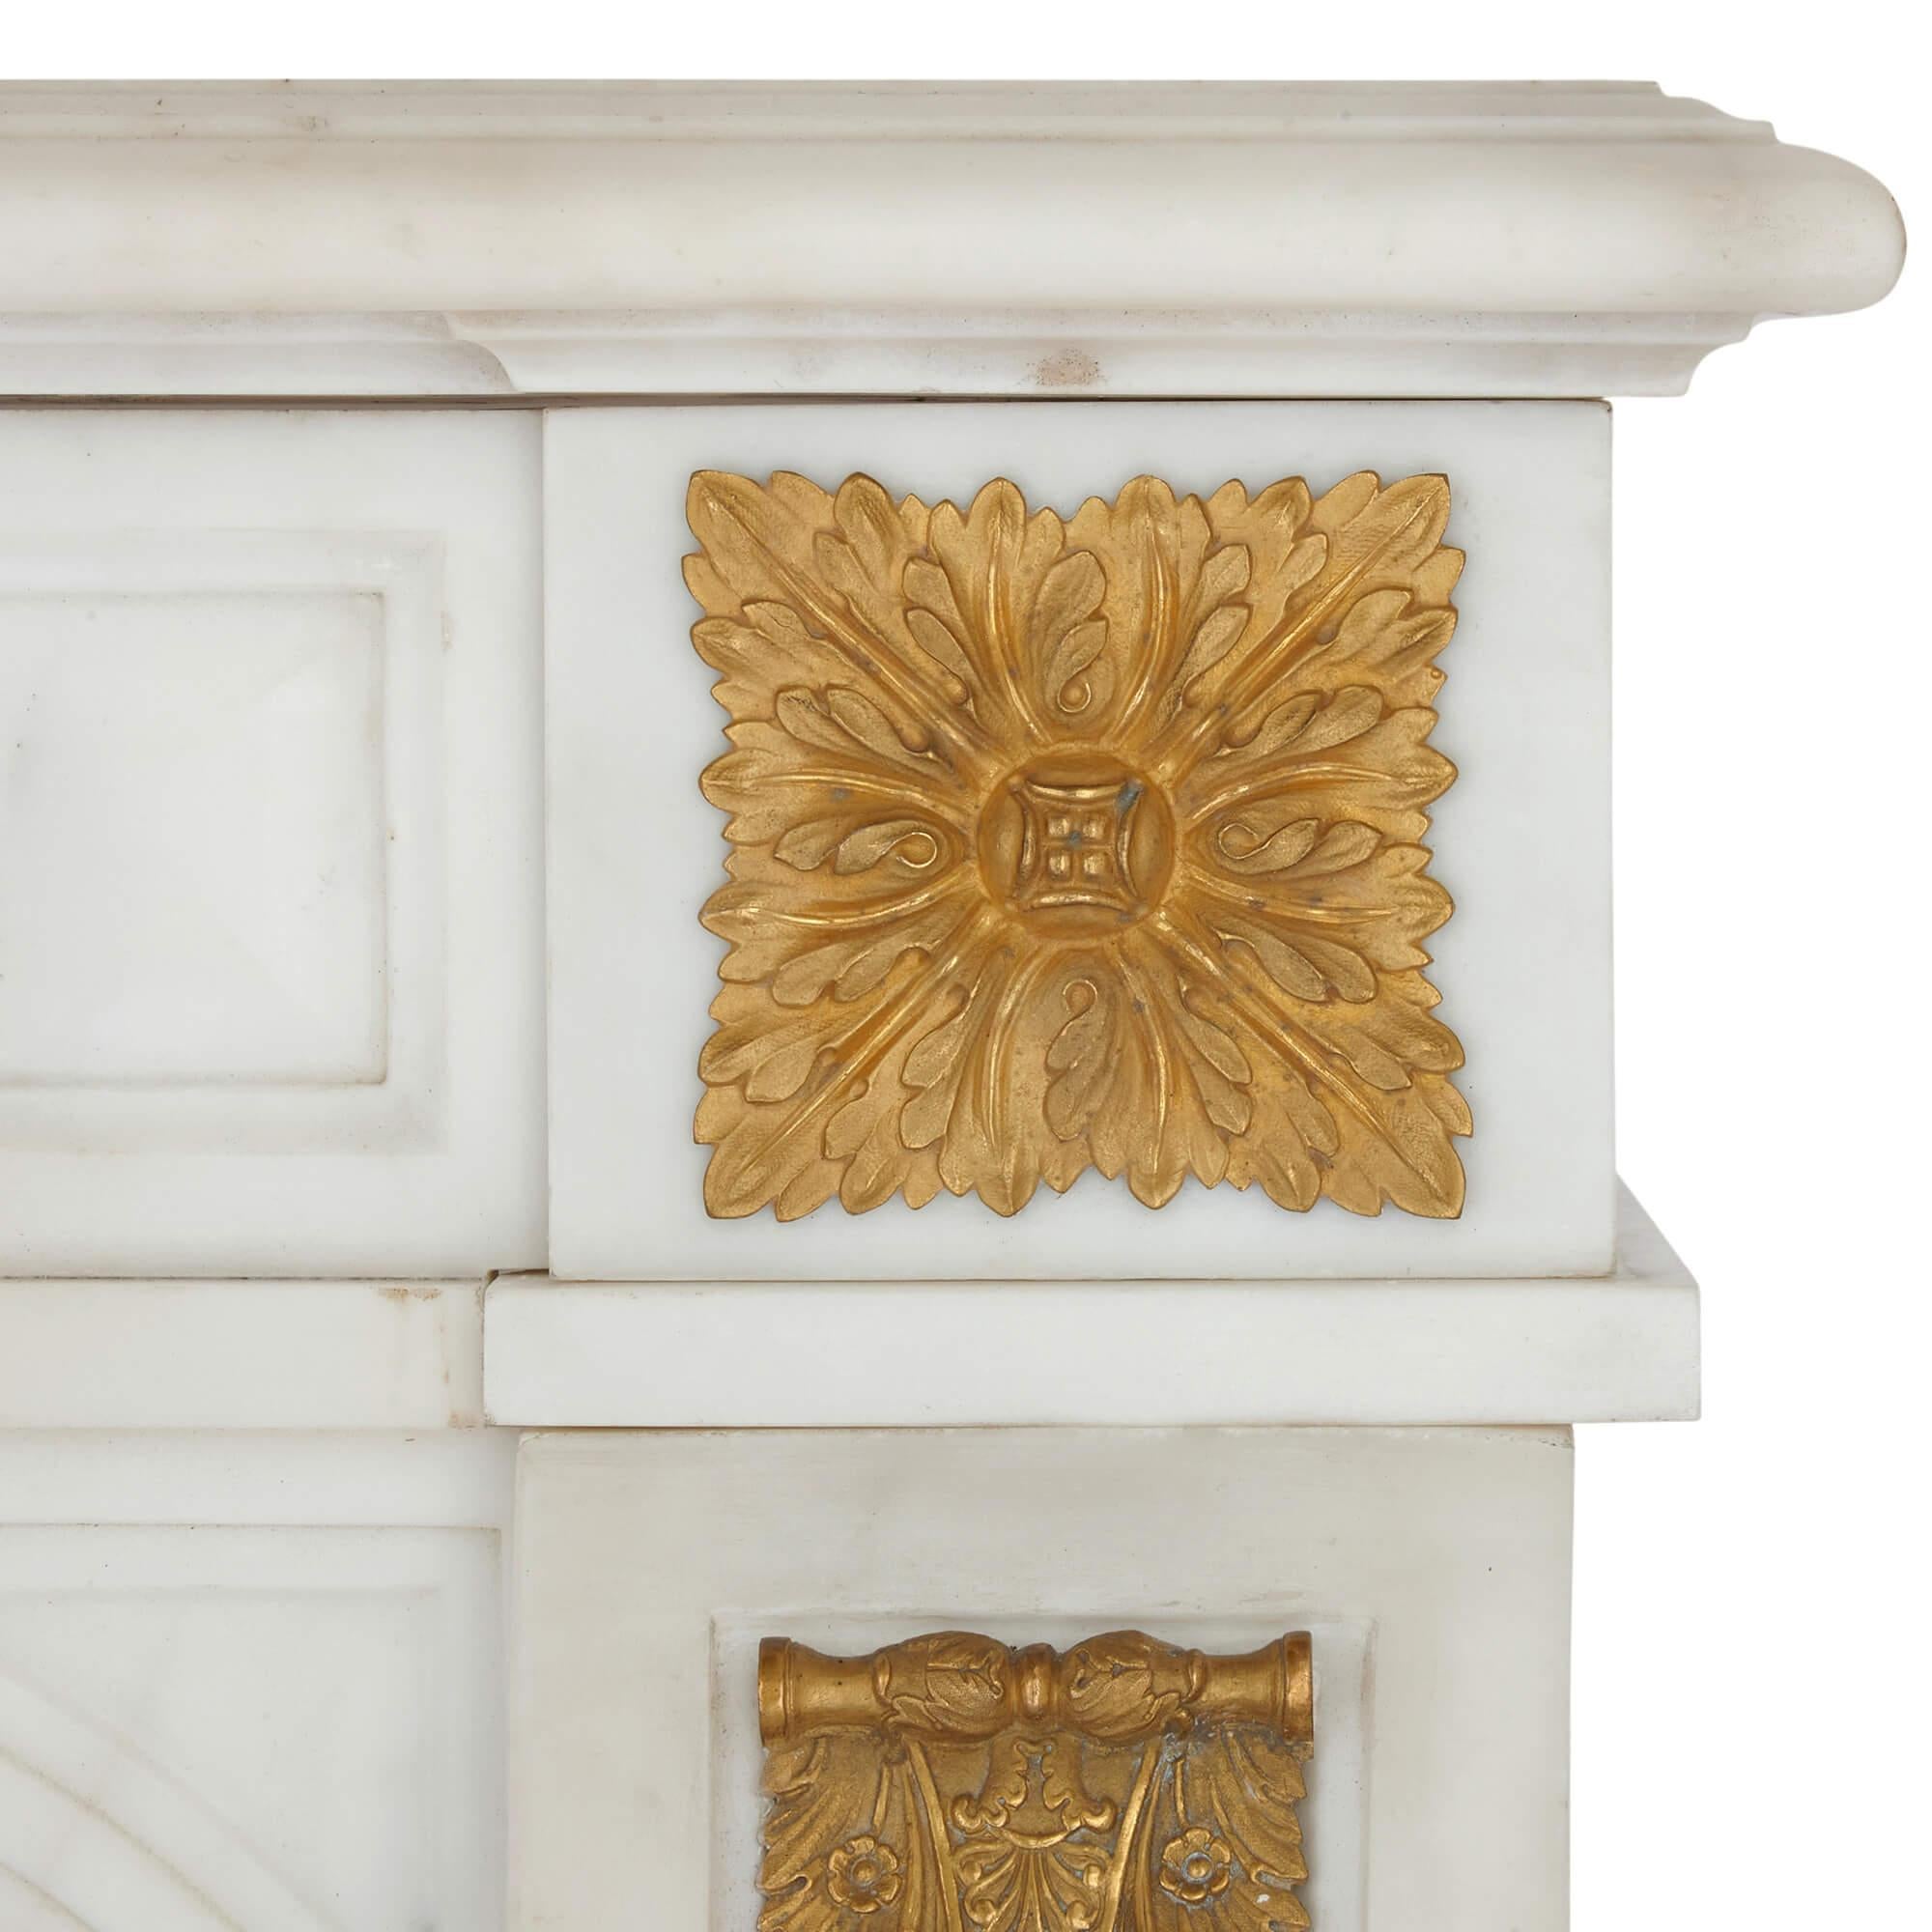 19th Century Pair of Antique French Ormolu Mounted Marble Fireplaces with Cast Iron Insets For Sale